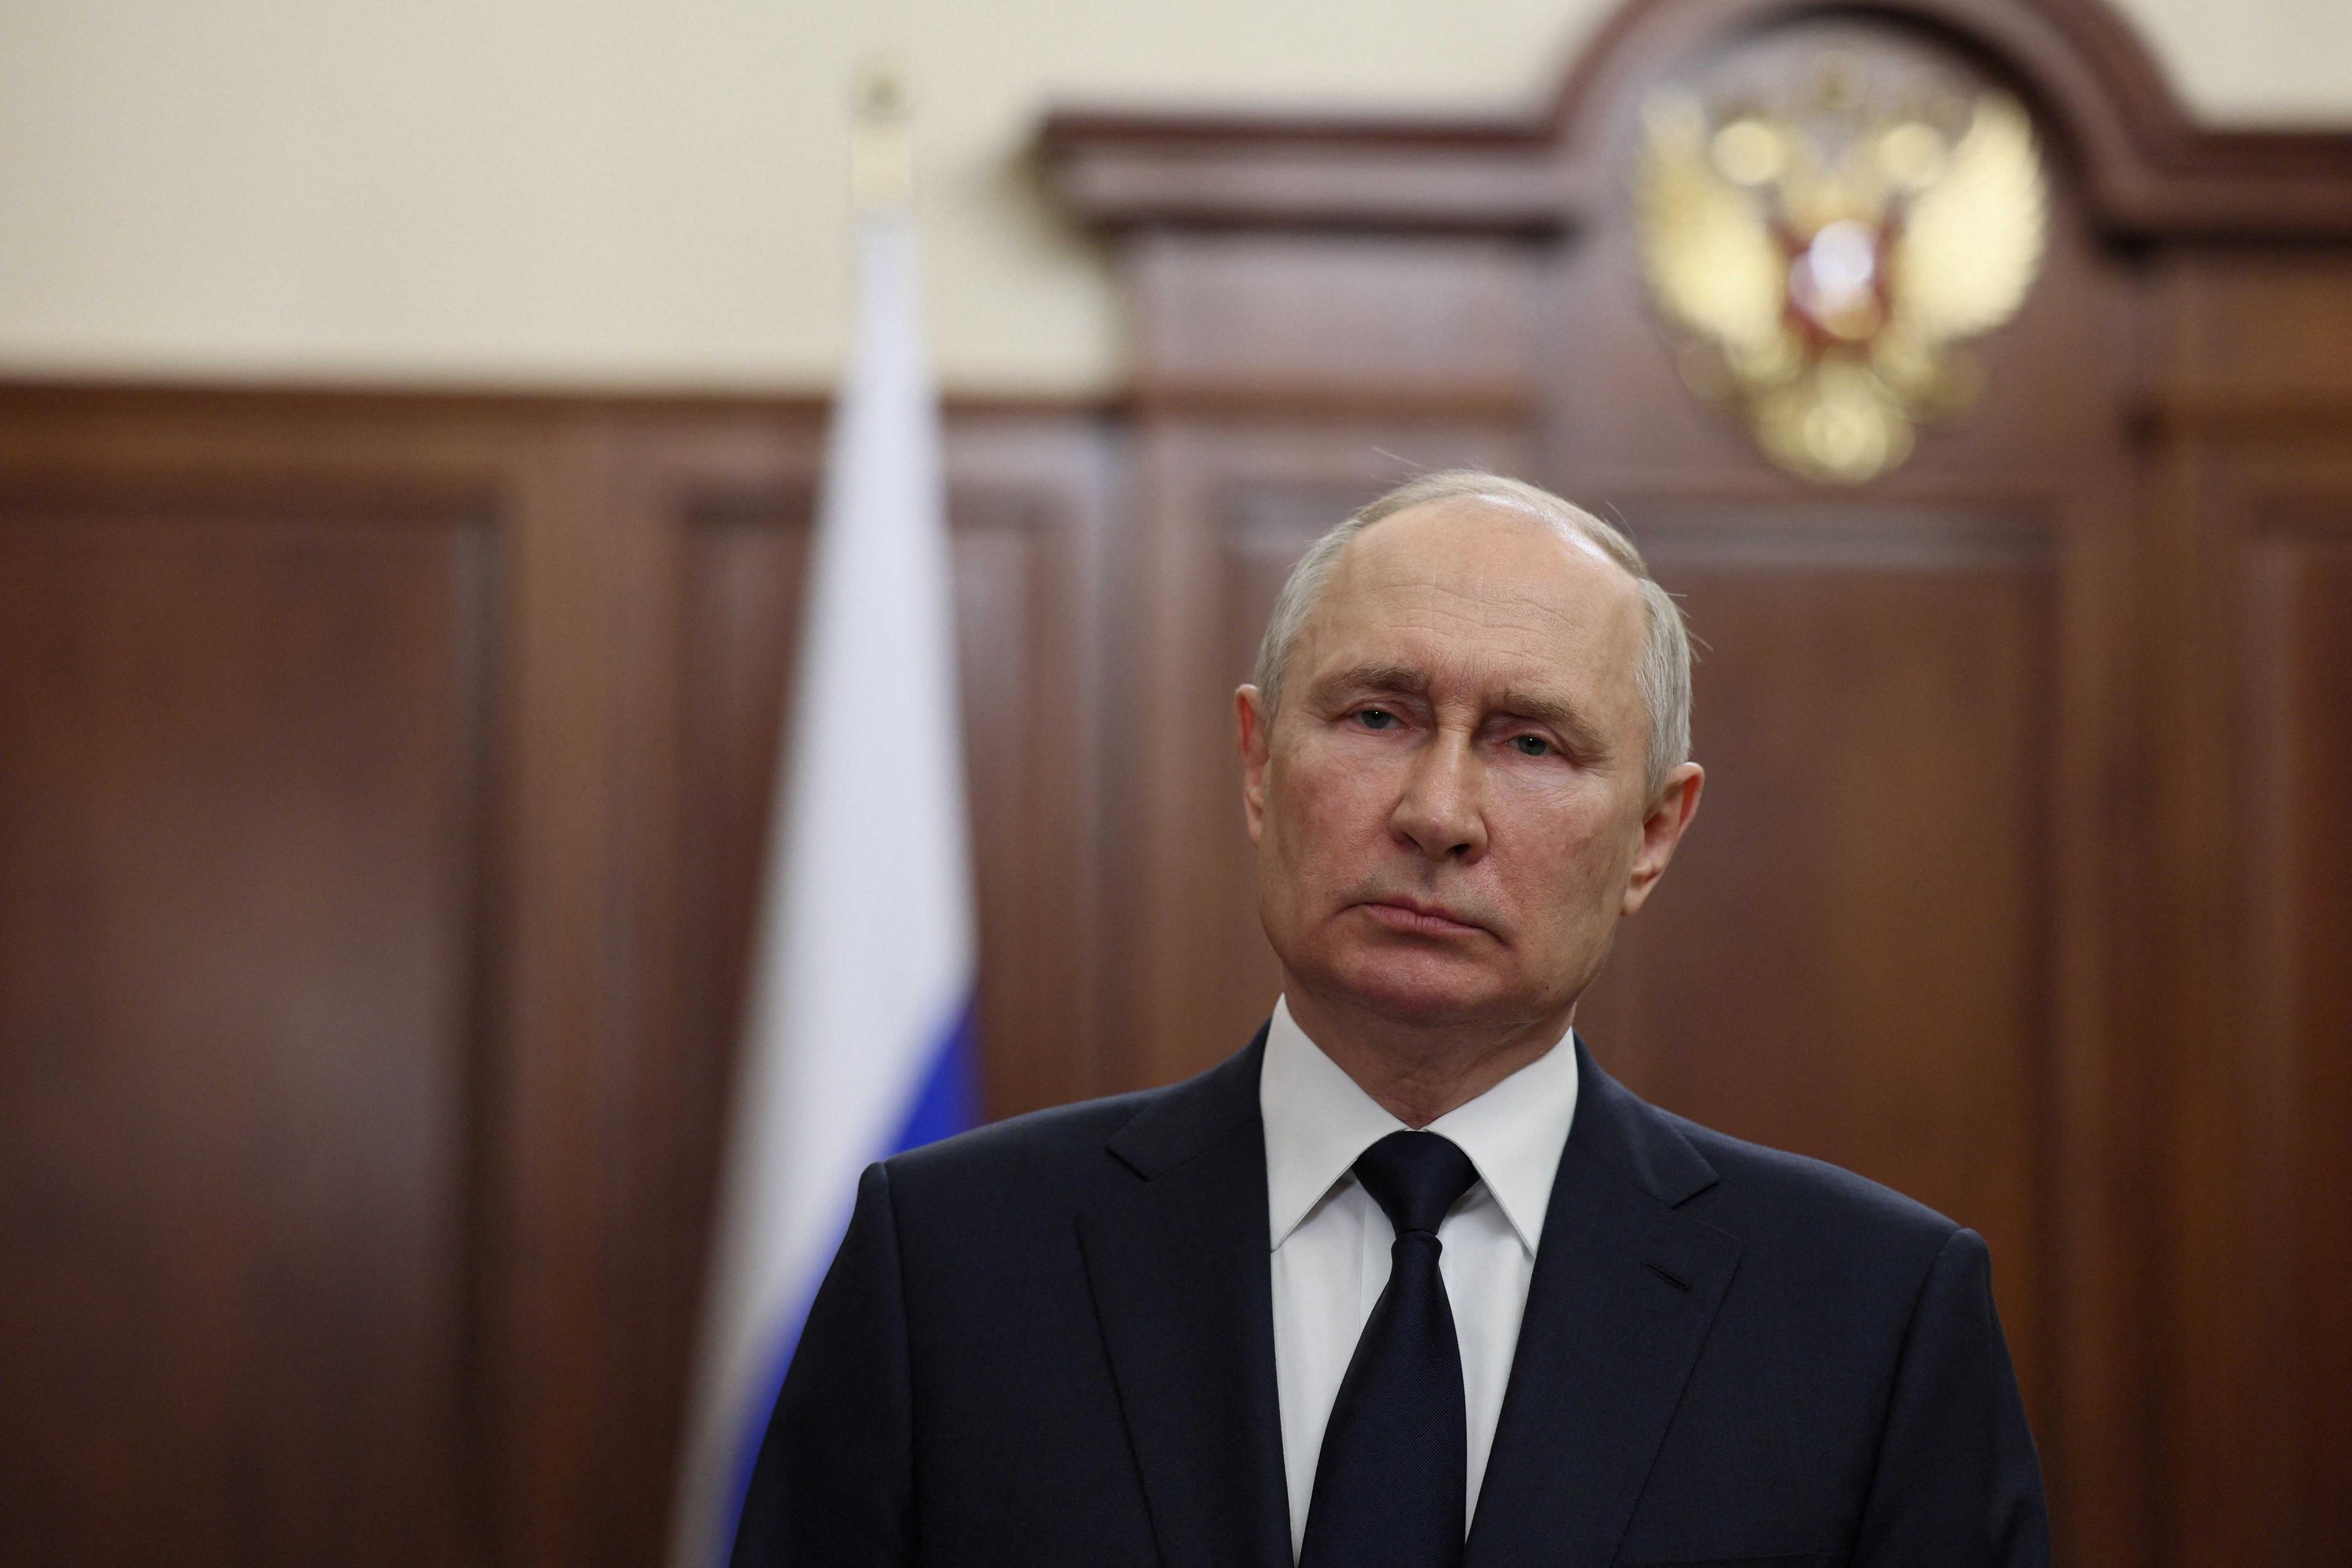 Russian President Vladimir Putin gives a televised address in Moscow, Russia, June 26. Photo: Reuters